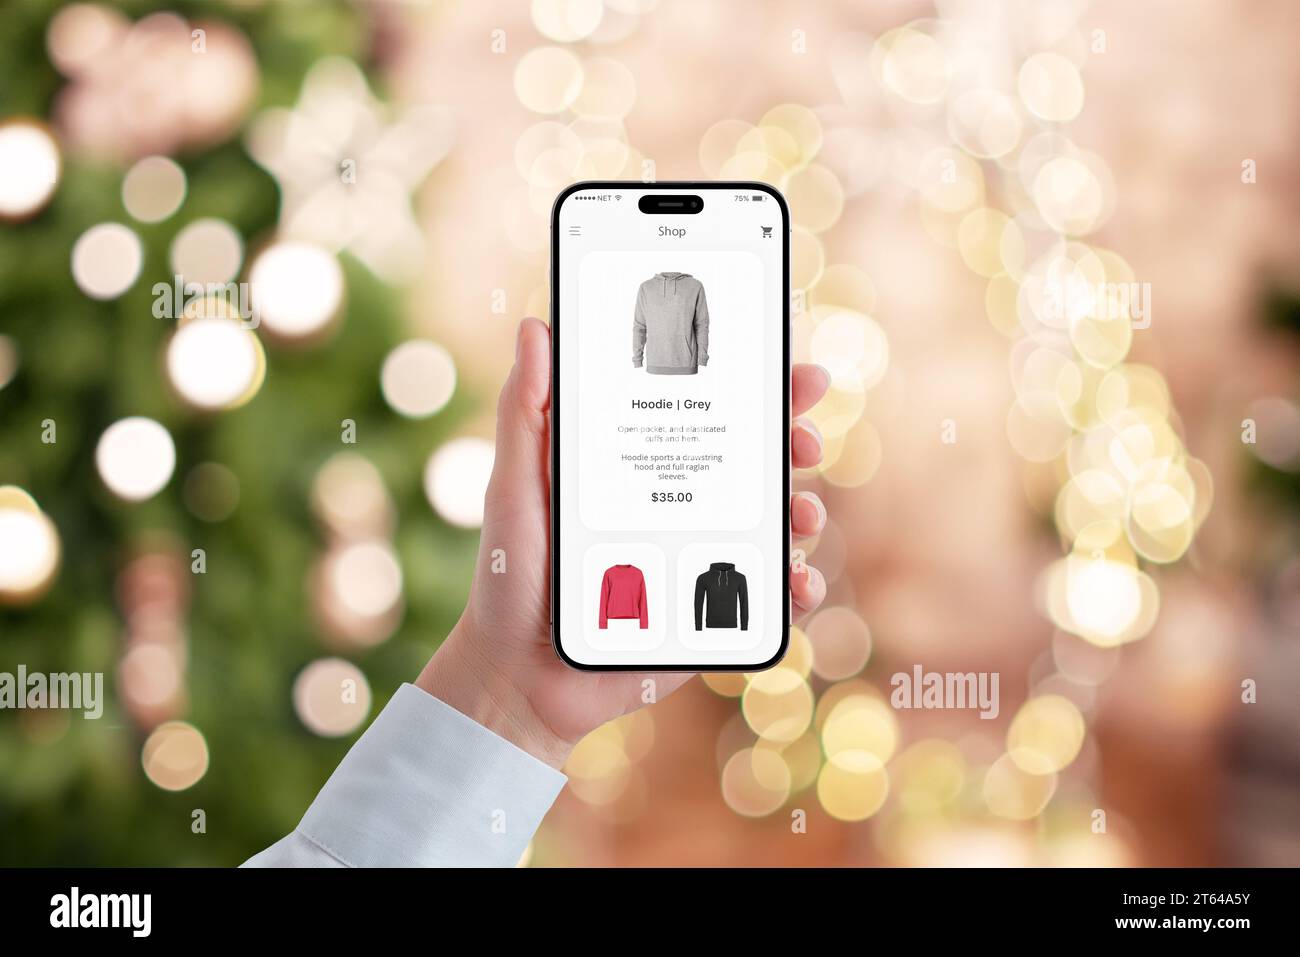 Woman's hand holds a mobile phone with a modern e-commerce app, engaged in Christmas shopping. Festive bokeh of Christmas tree lights creates a holida Stock Photo